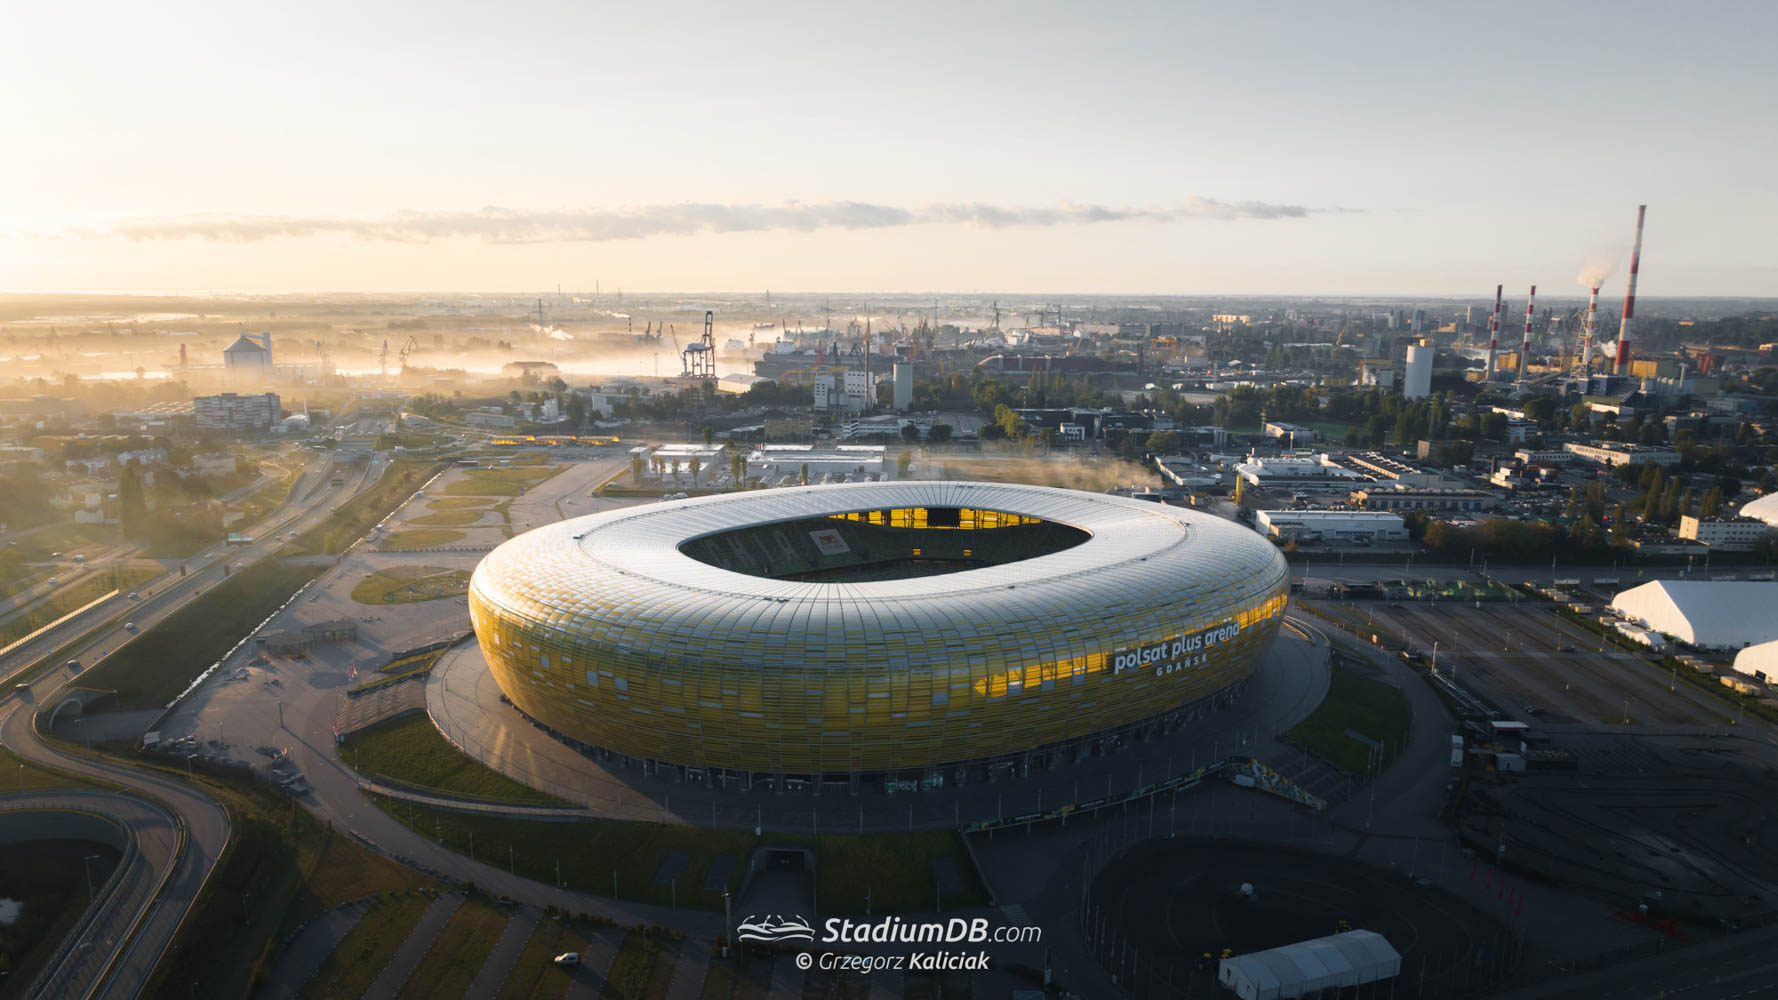 Polsat Plus Arena - All You Need to Know BEFORE You Go (with Photos)